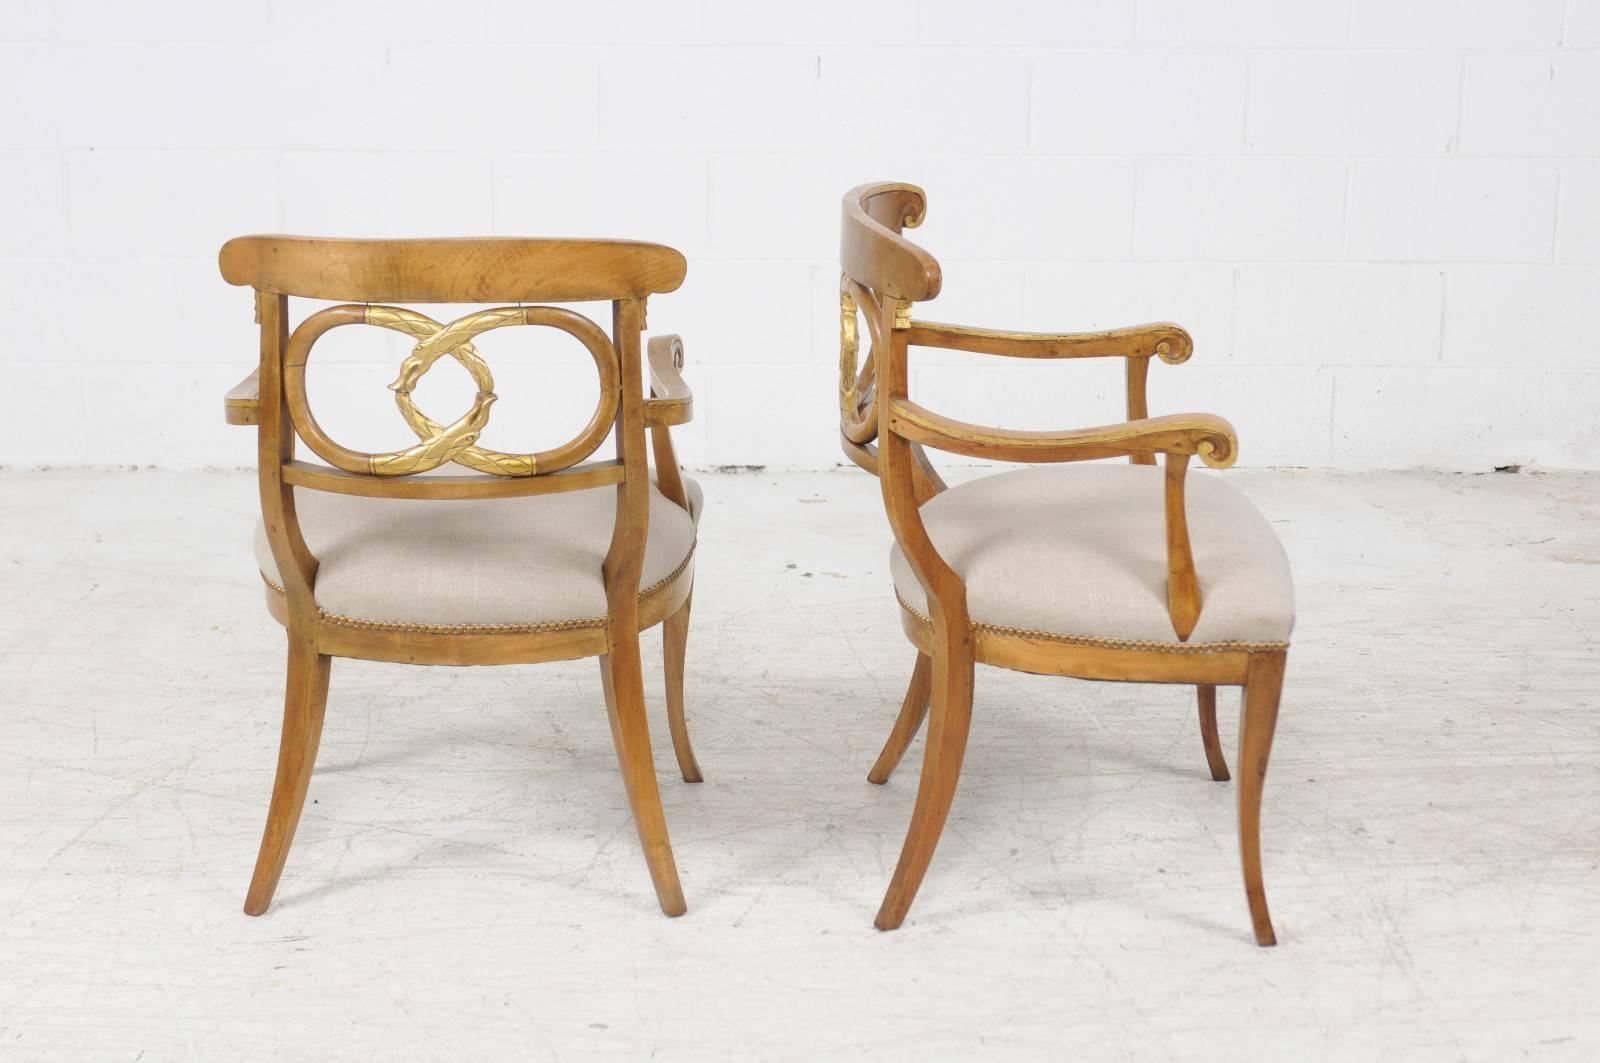 Pair of Italian 1860s Parcel-Gilt Walnut Upholstered Chairs with Serpent Motifs 5